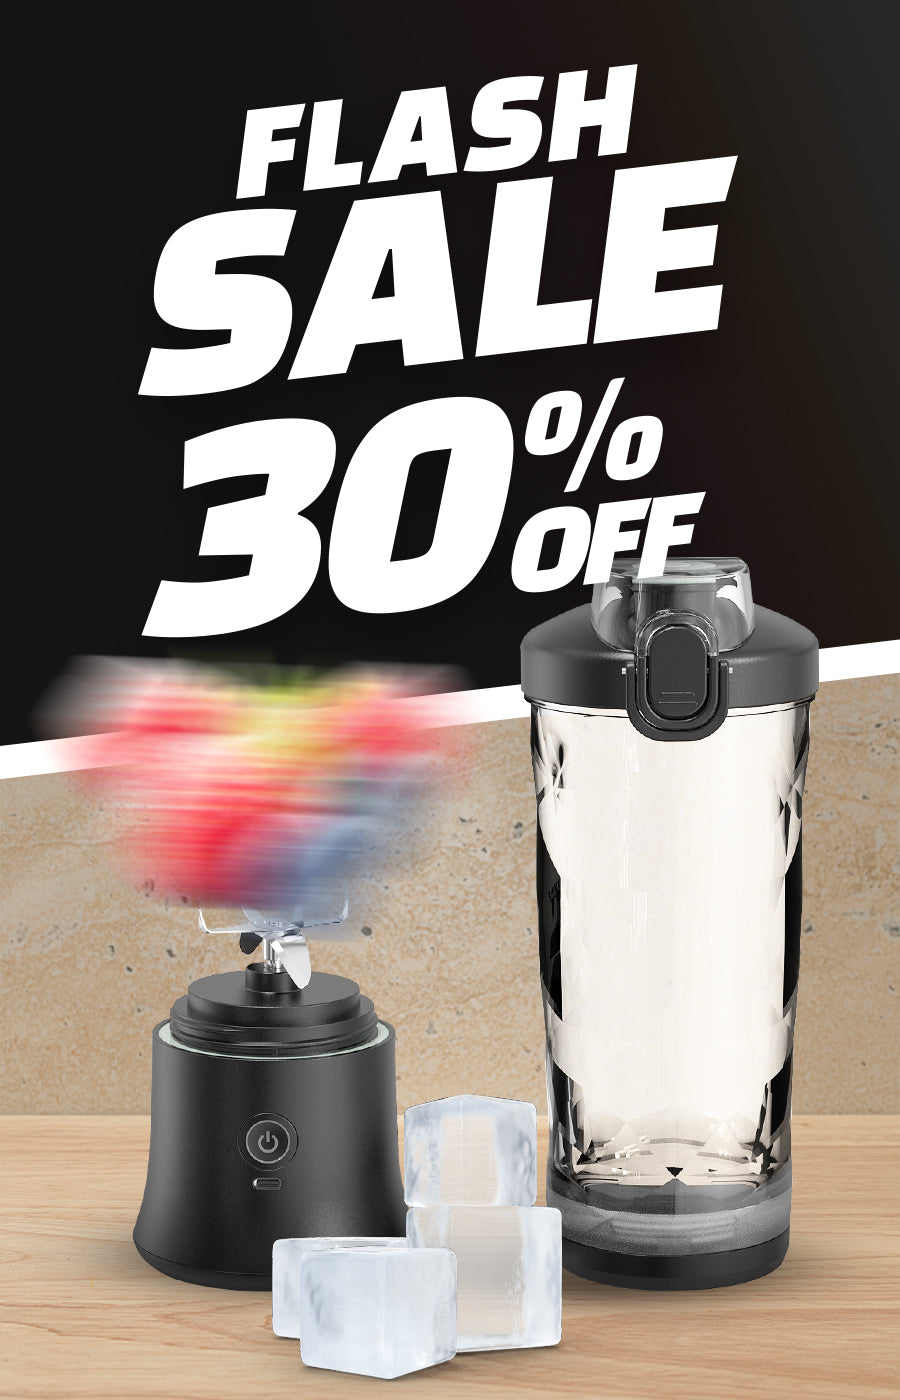 Just Mix Personal Smoothie Blender is 50% off